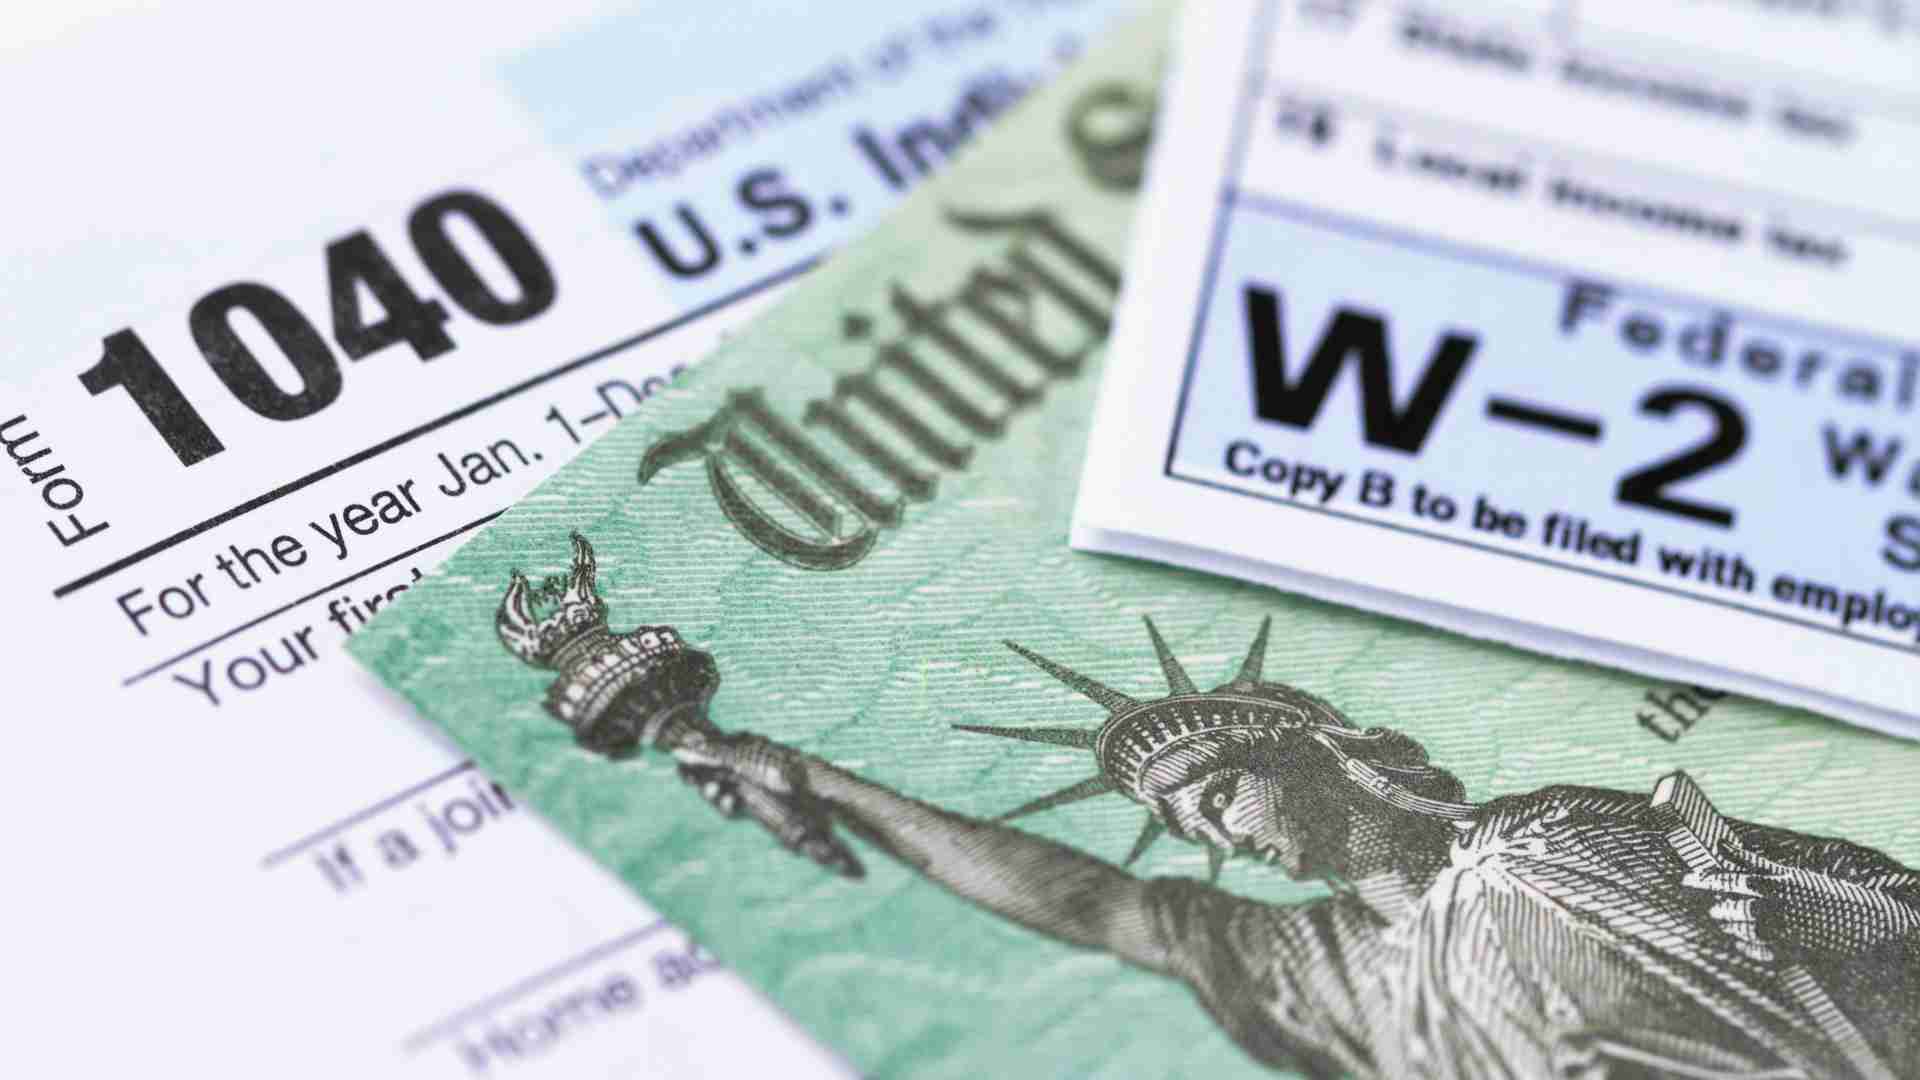 The IRS warns taxpayers that they must pay their taxes before the April 15 deadline